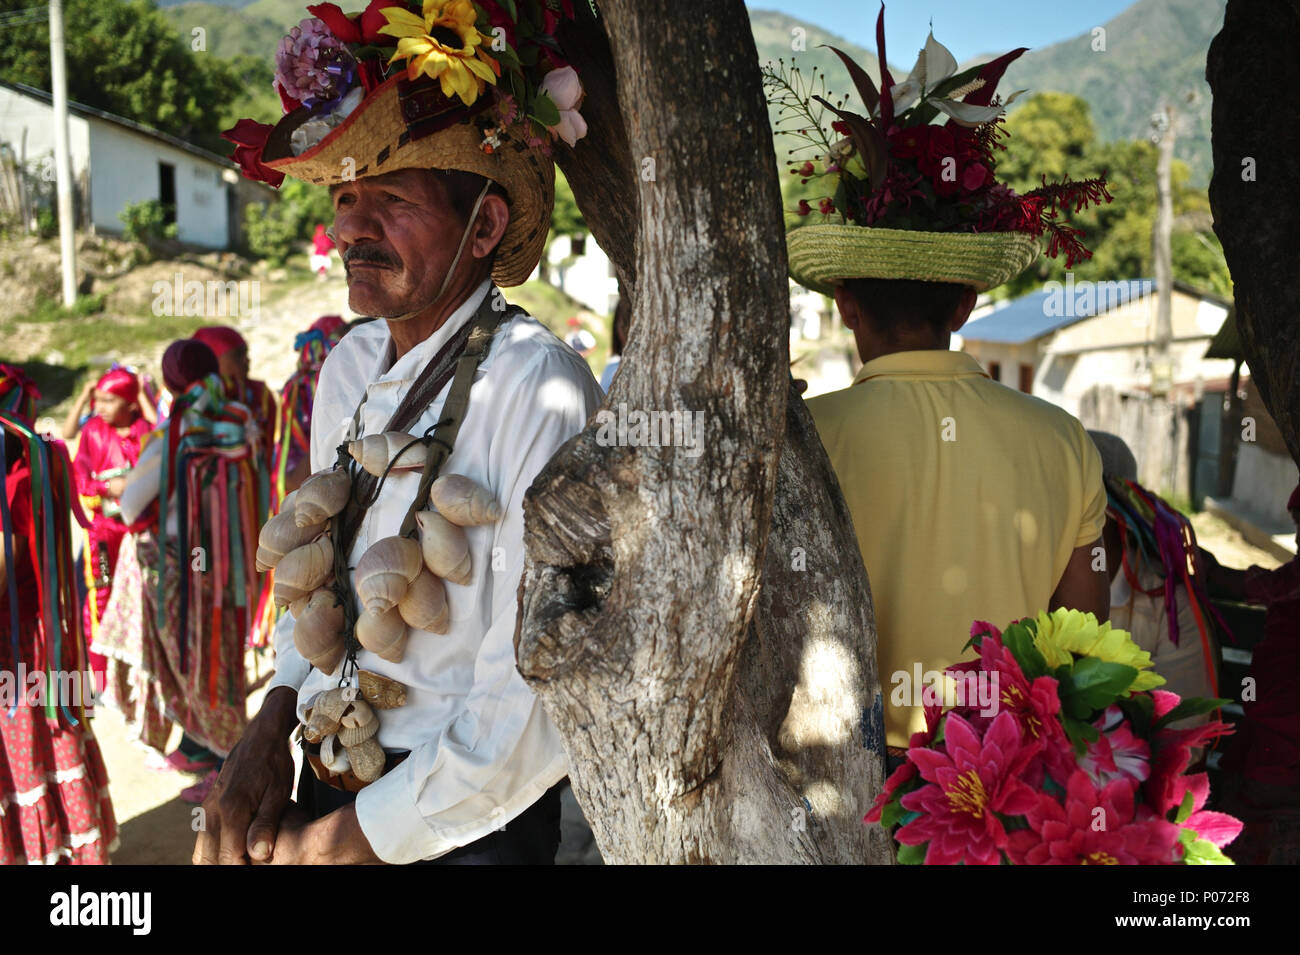 Atanquez, Cesar, Colombia. 31st May, 2018. At the foothill of the snow-covered peaks of Sierra Nevada, within the Kankuamo Indians territory, a colorful celebration of the Christian feast of Corpus Christi is held every year. It us a Christian religious event that normally coincides with the summer solstice. Pagan Demon characters, Indian sacred places and other Pre-Columbian features are incorporated. The ritual represents an allegorical fight between the God and the Devil."The Dance of the Devils"" is an ancient tradition kept for centuries in few communities on the Colombia's Caribbean c Stock Photo